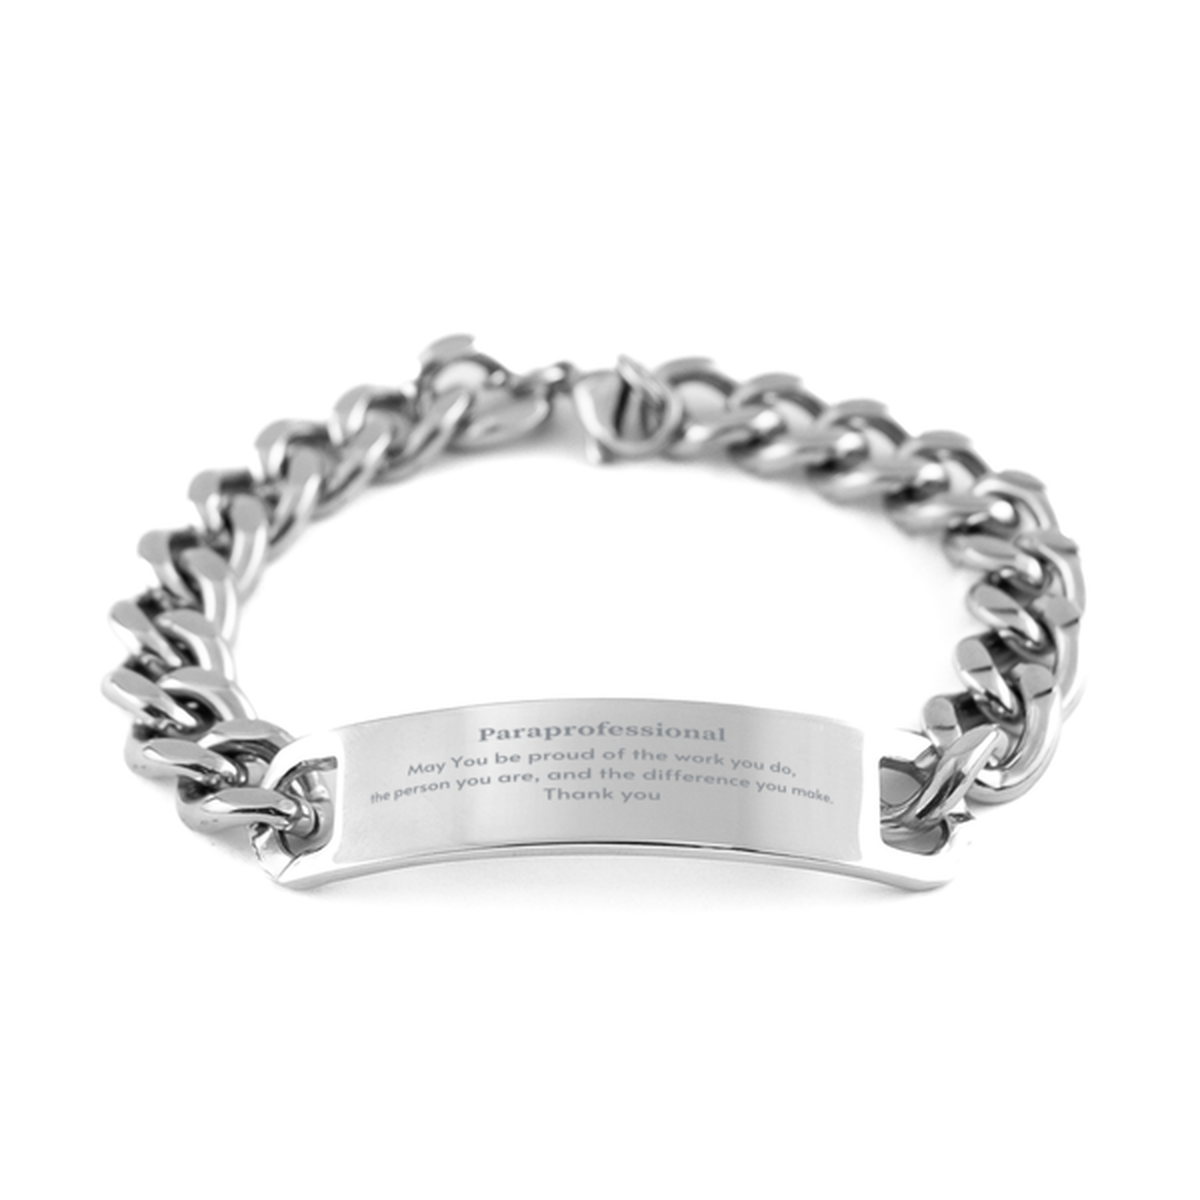 Heartwarming Cuban Chain Stainless Steel Bracelet Retirement Coworkers Gifts for Paraprofessional, Paraprofessional May You be proud of the work you do, the person you are Gifts for Boss Men Women Friends